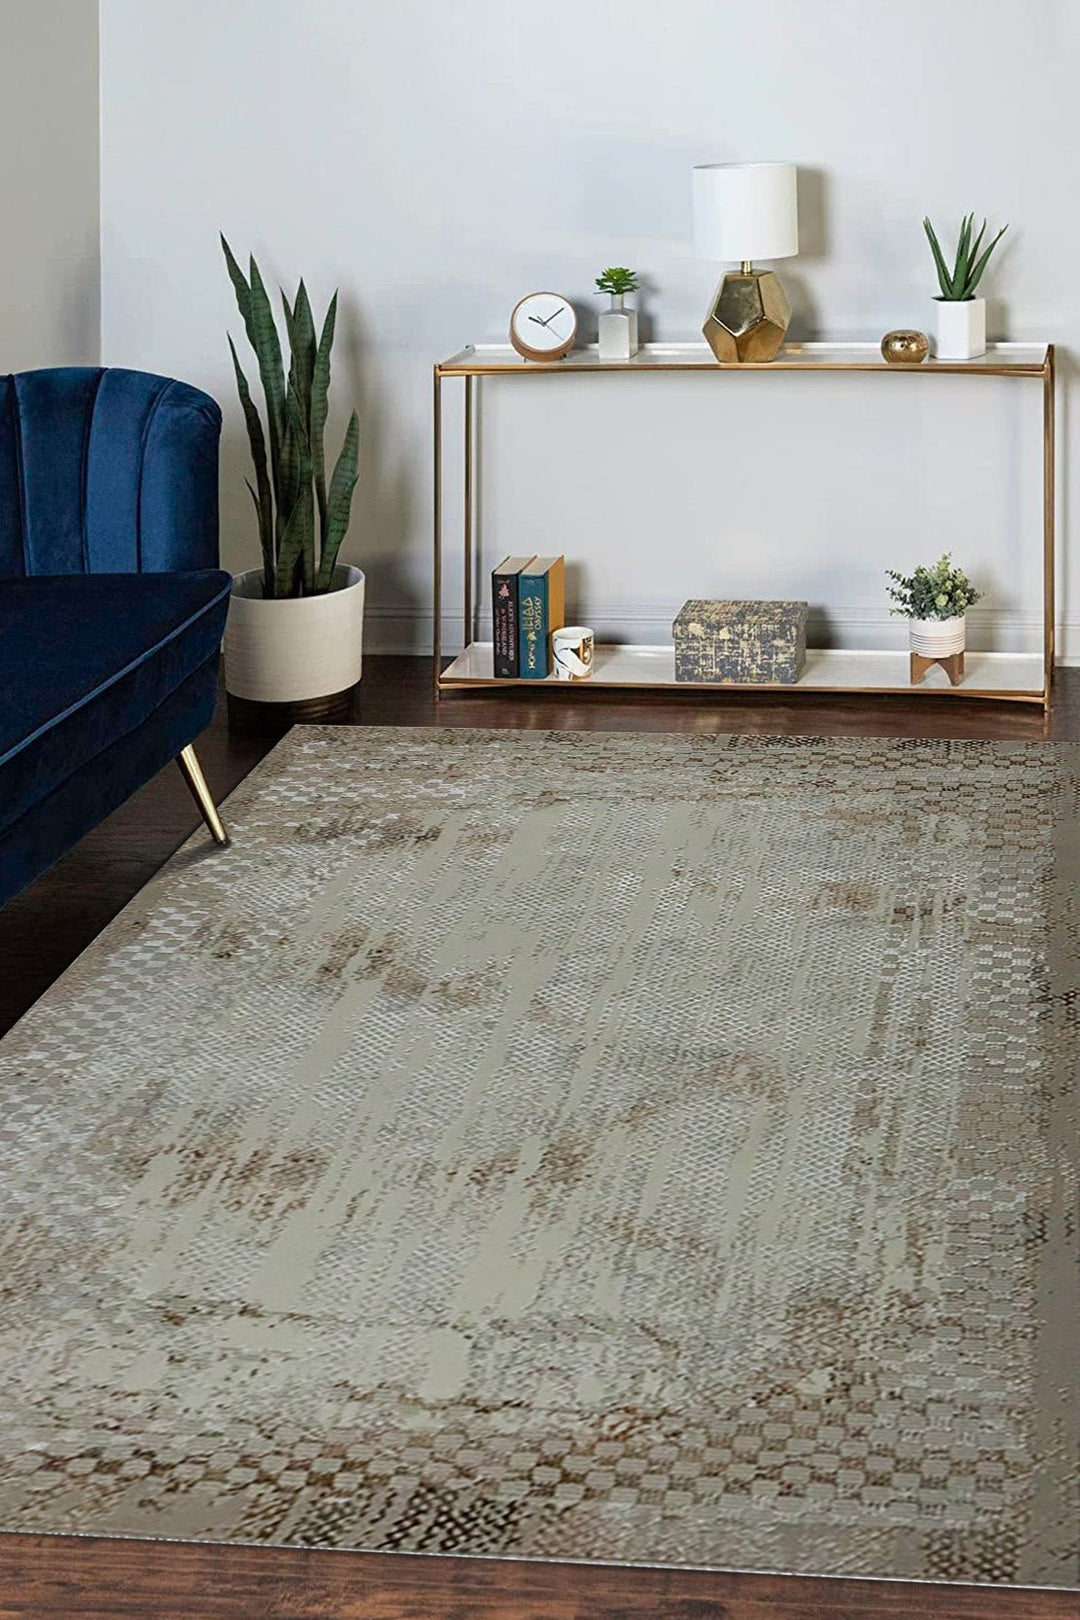 Turkish Modern Diamond Rug - Beige - 4.9 x 7.3 FT - Superior Comfort, Modern Style Accent Rugs - V Surfaces